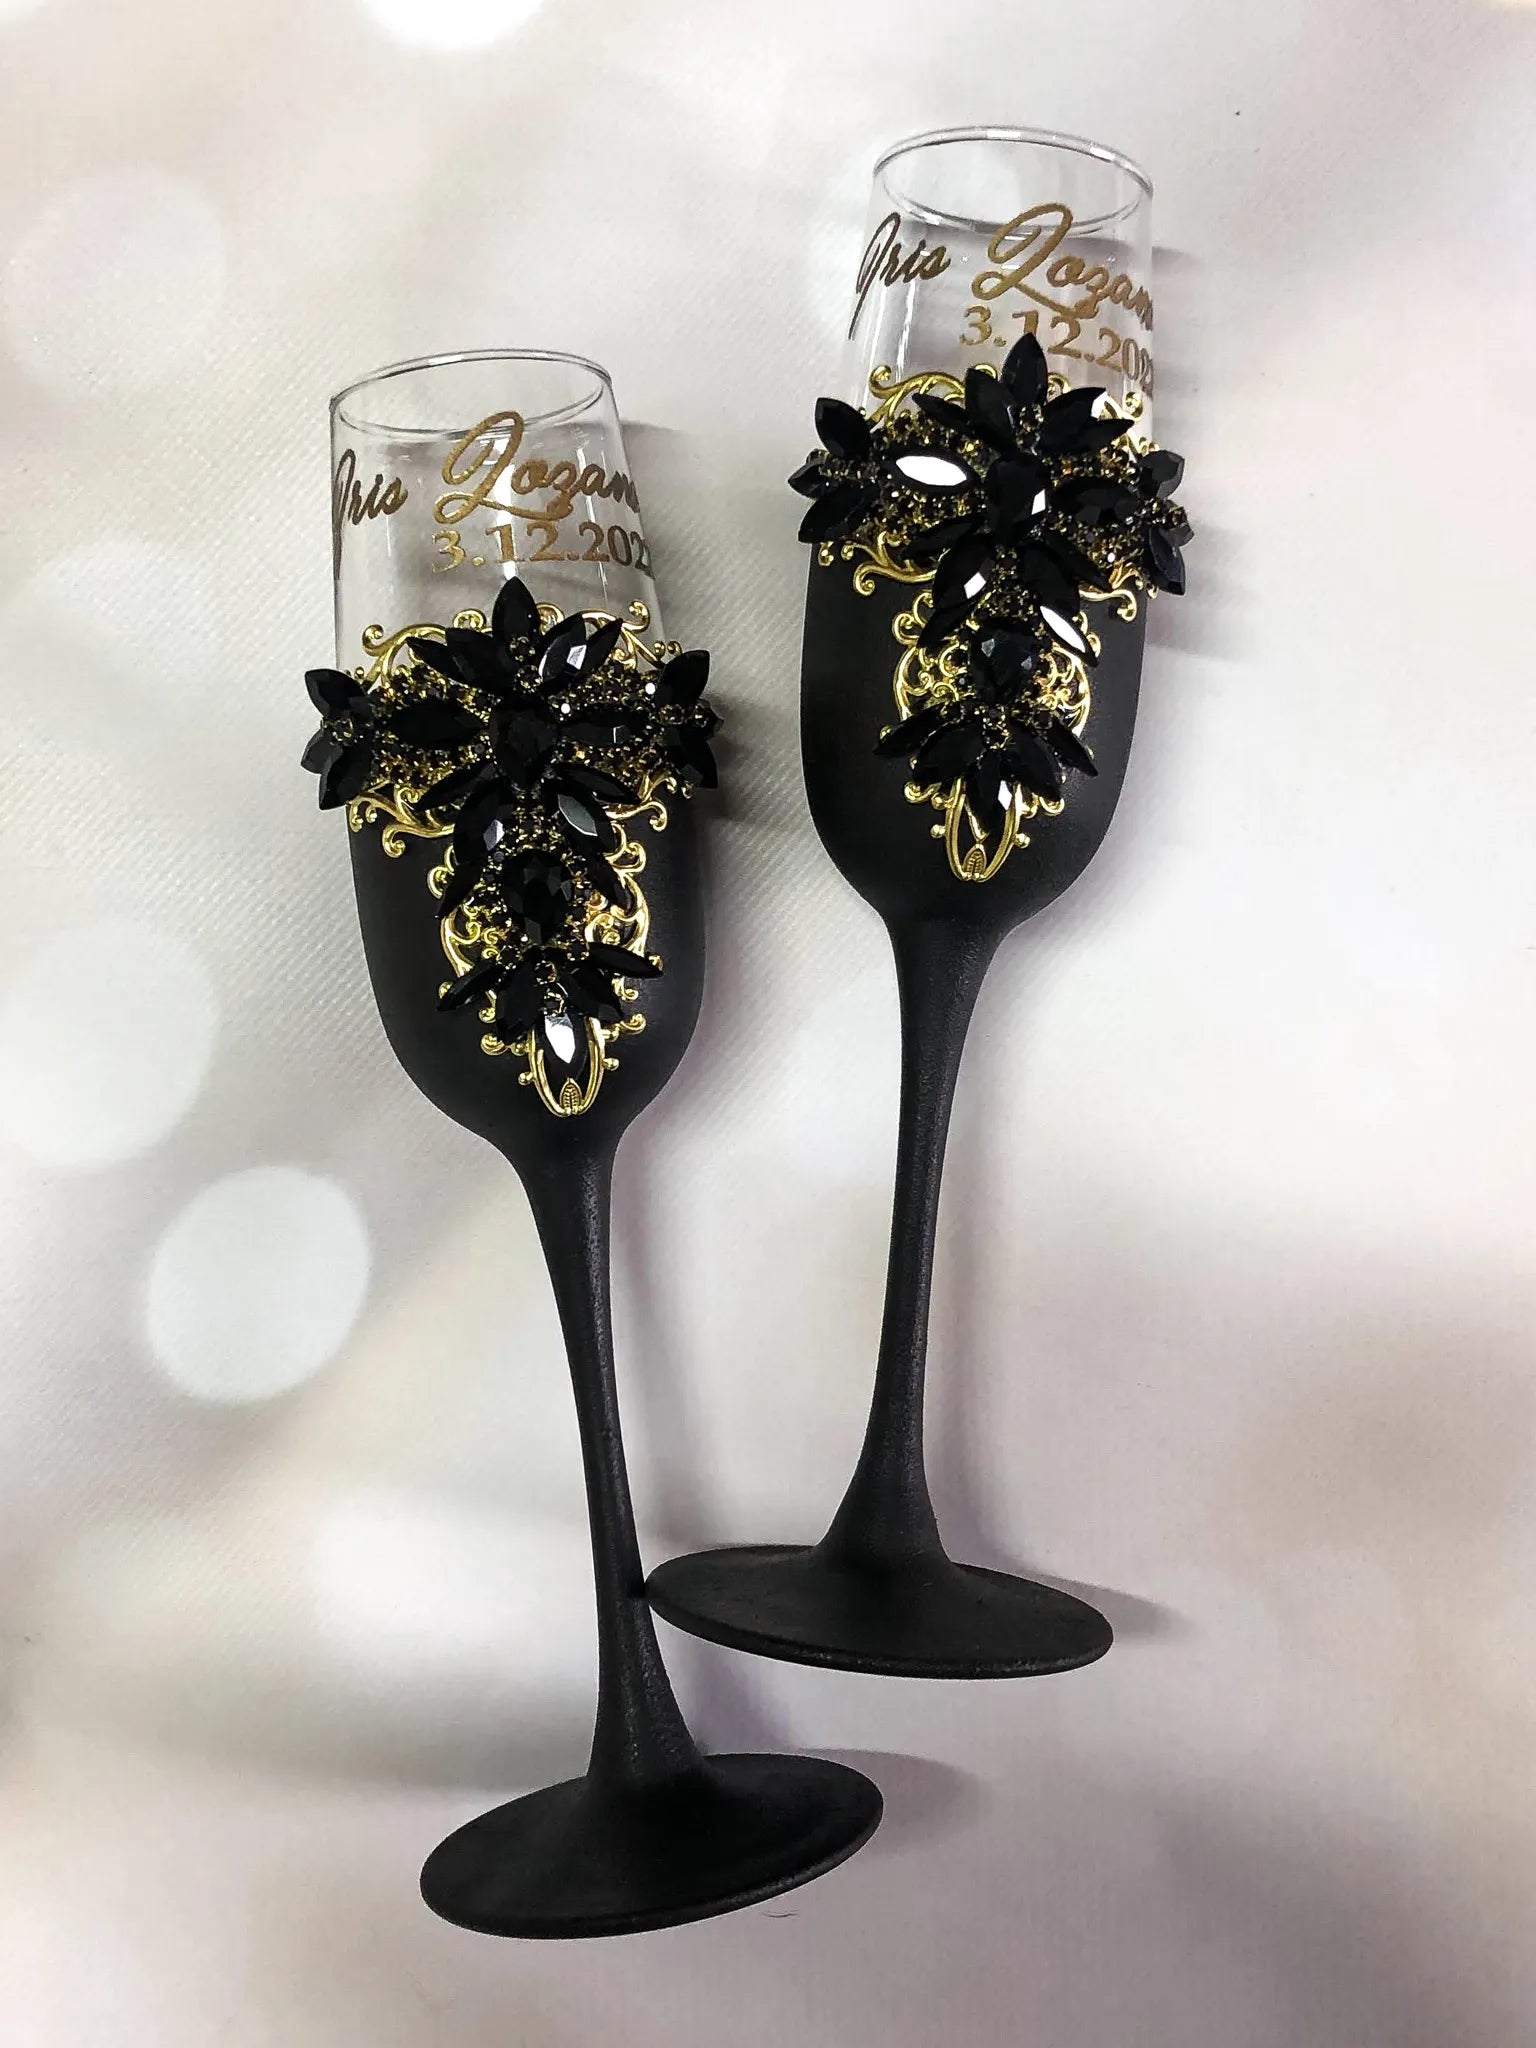 Engraved champagne flutes in black and gold